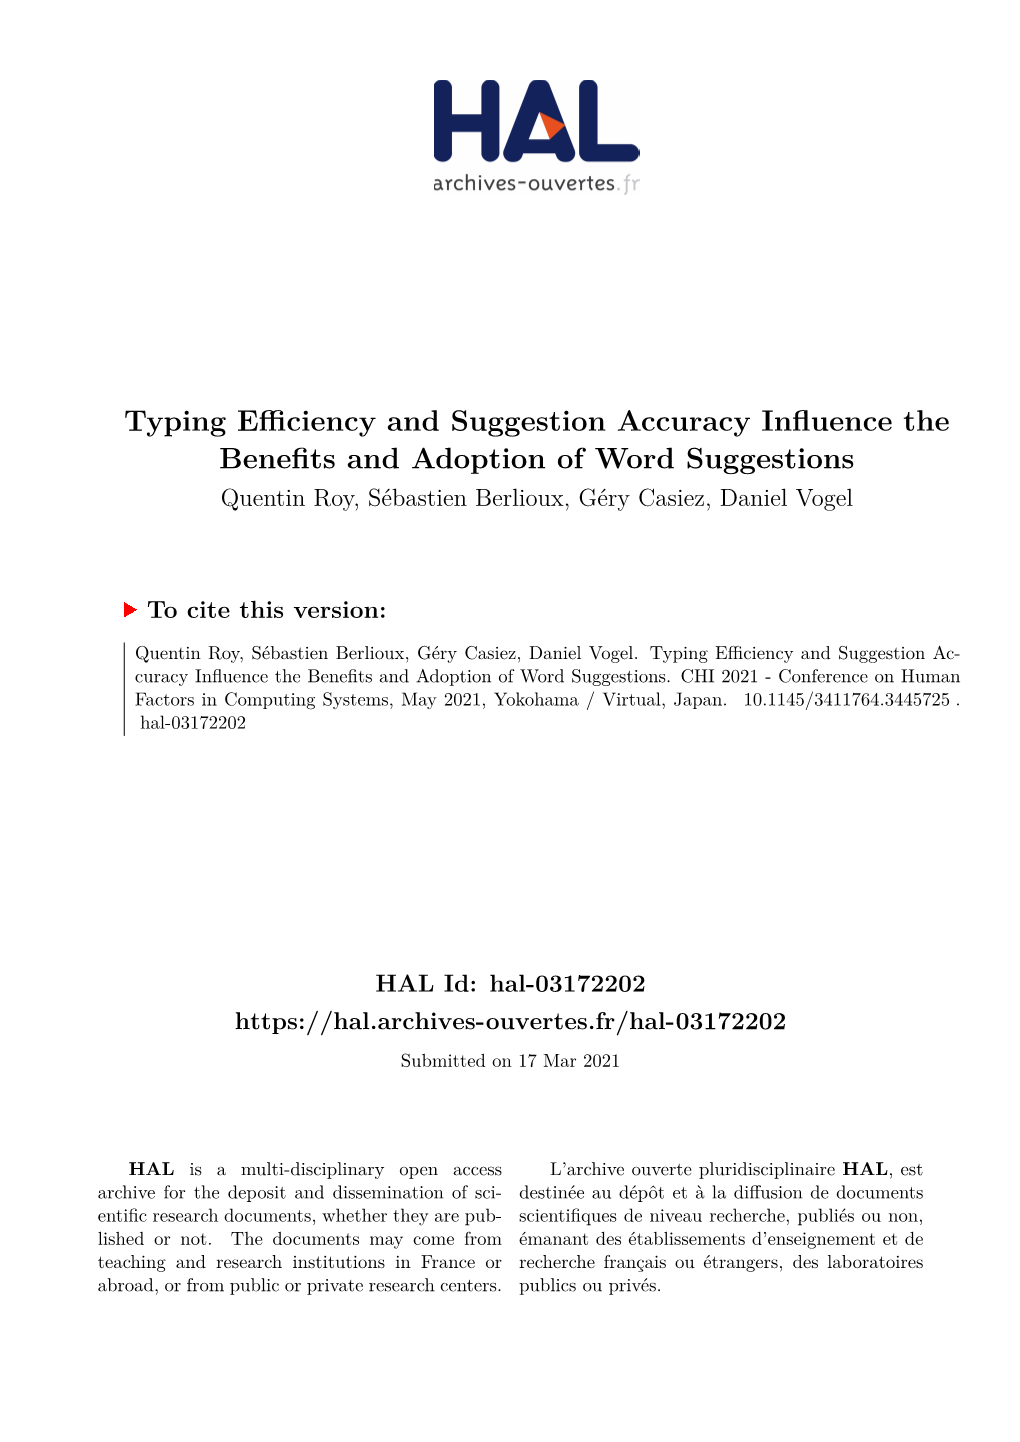 Typing Efficiency and Suggestion Accuracy Influence the Benefits and Adoption of Word Suggestions